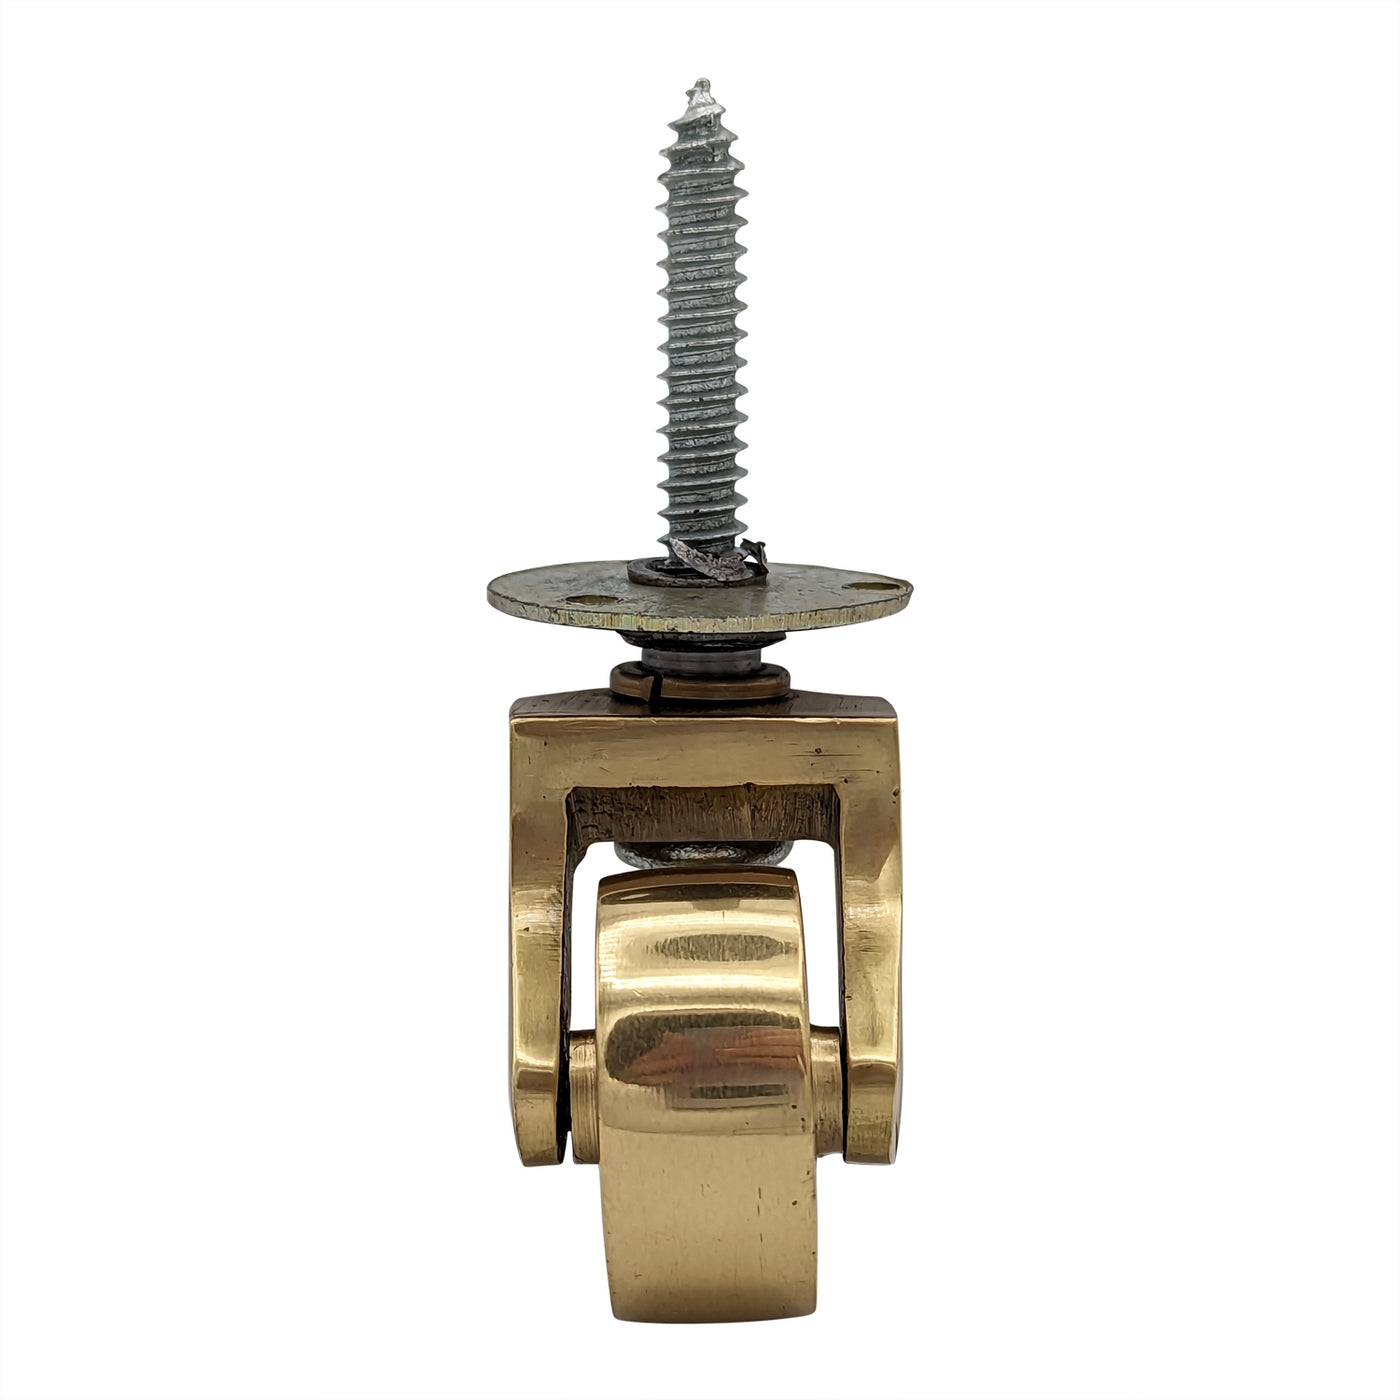 Pair of Solid Brass Threaded Casters (Several Finishes Available)